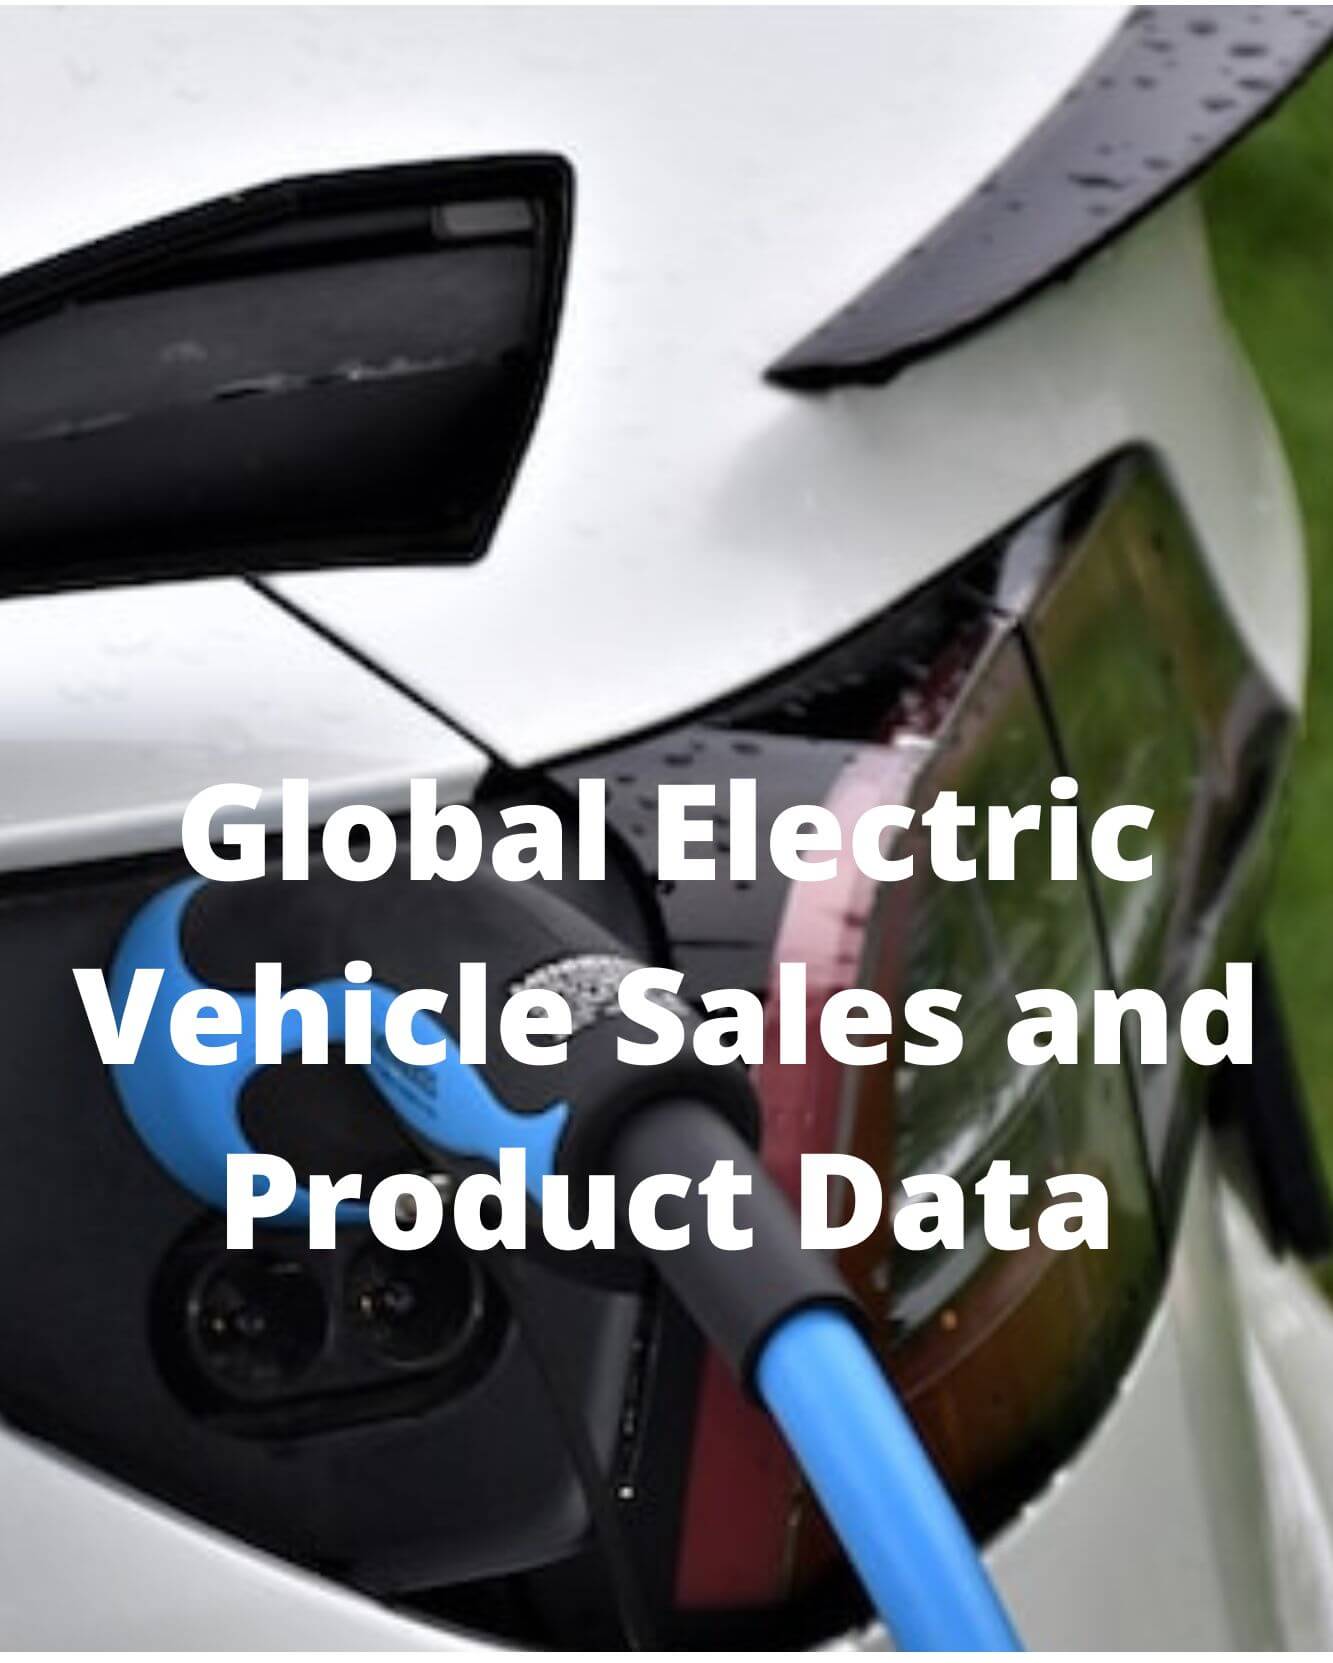 Global Electric Vehicle Sales and Product Data